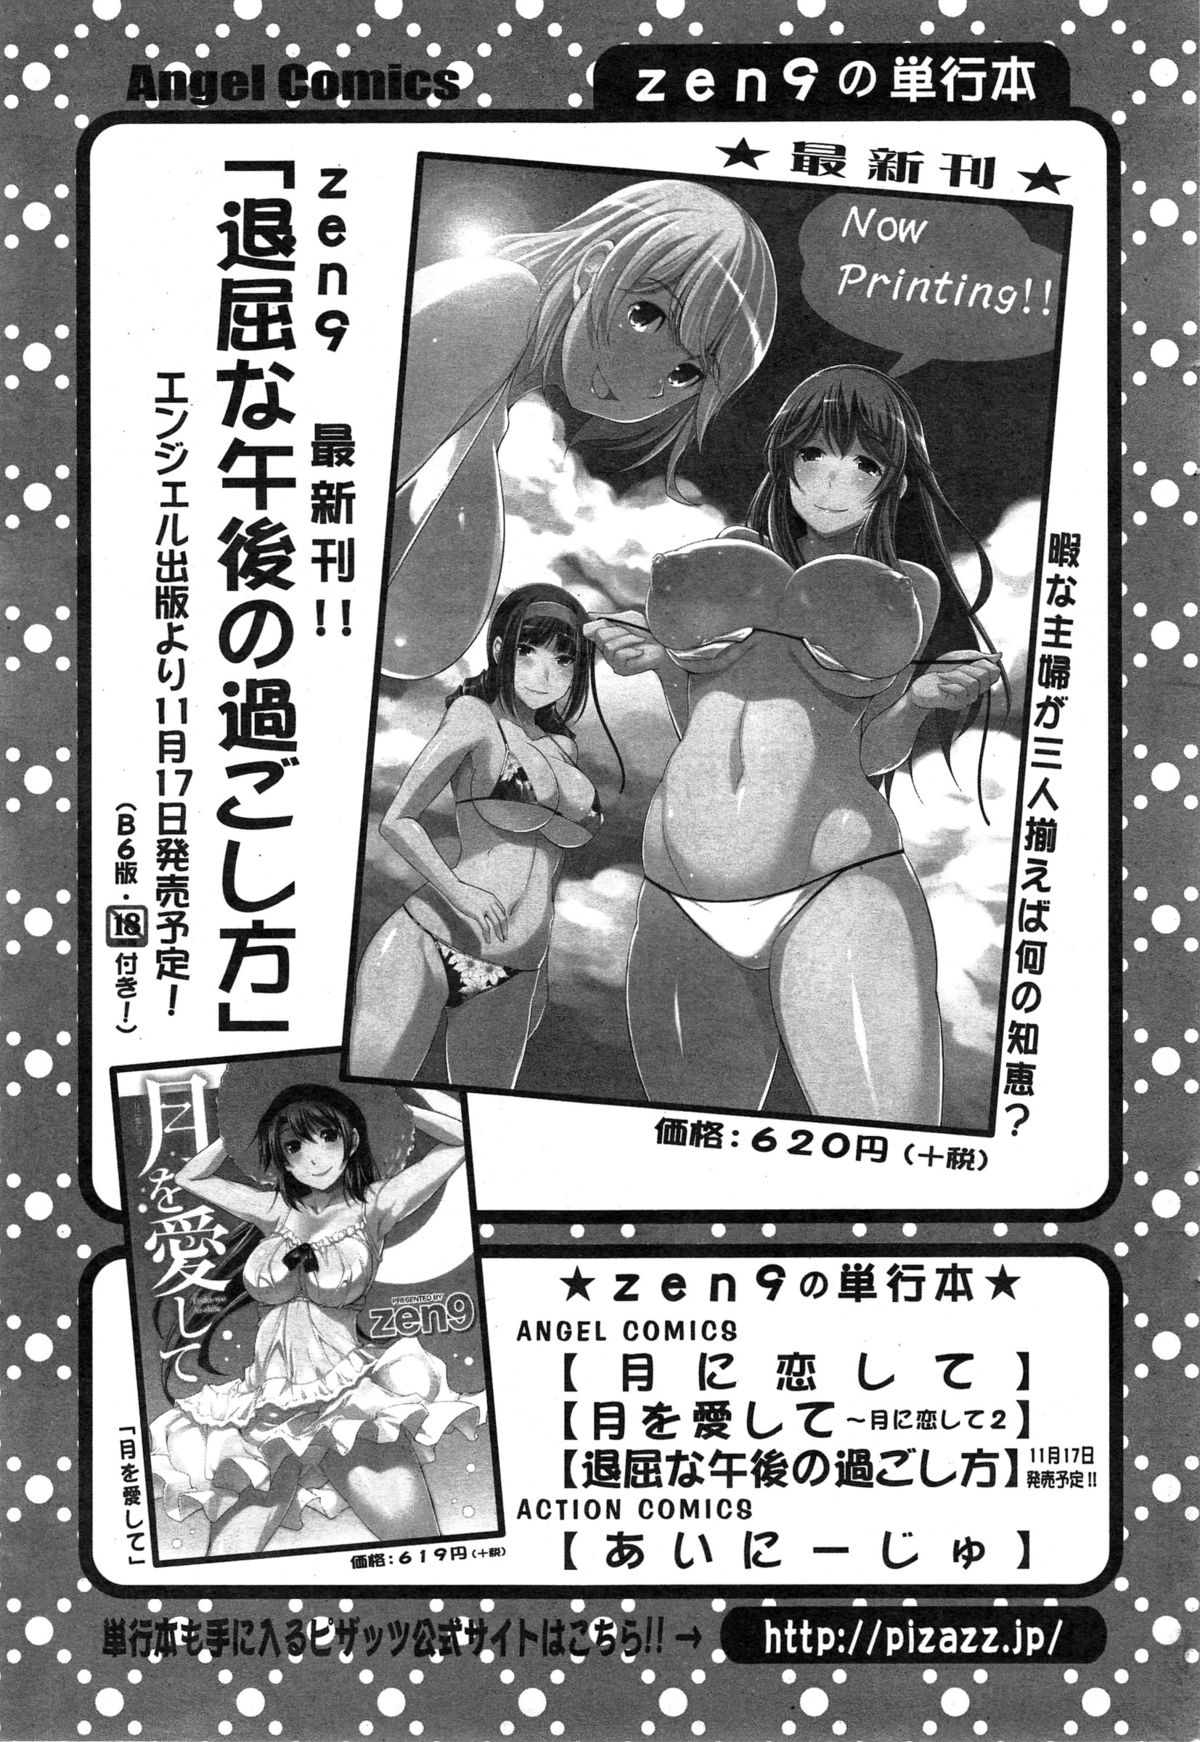 Action Pizazz DX 2014-12 page 39 full